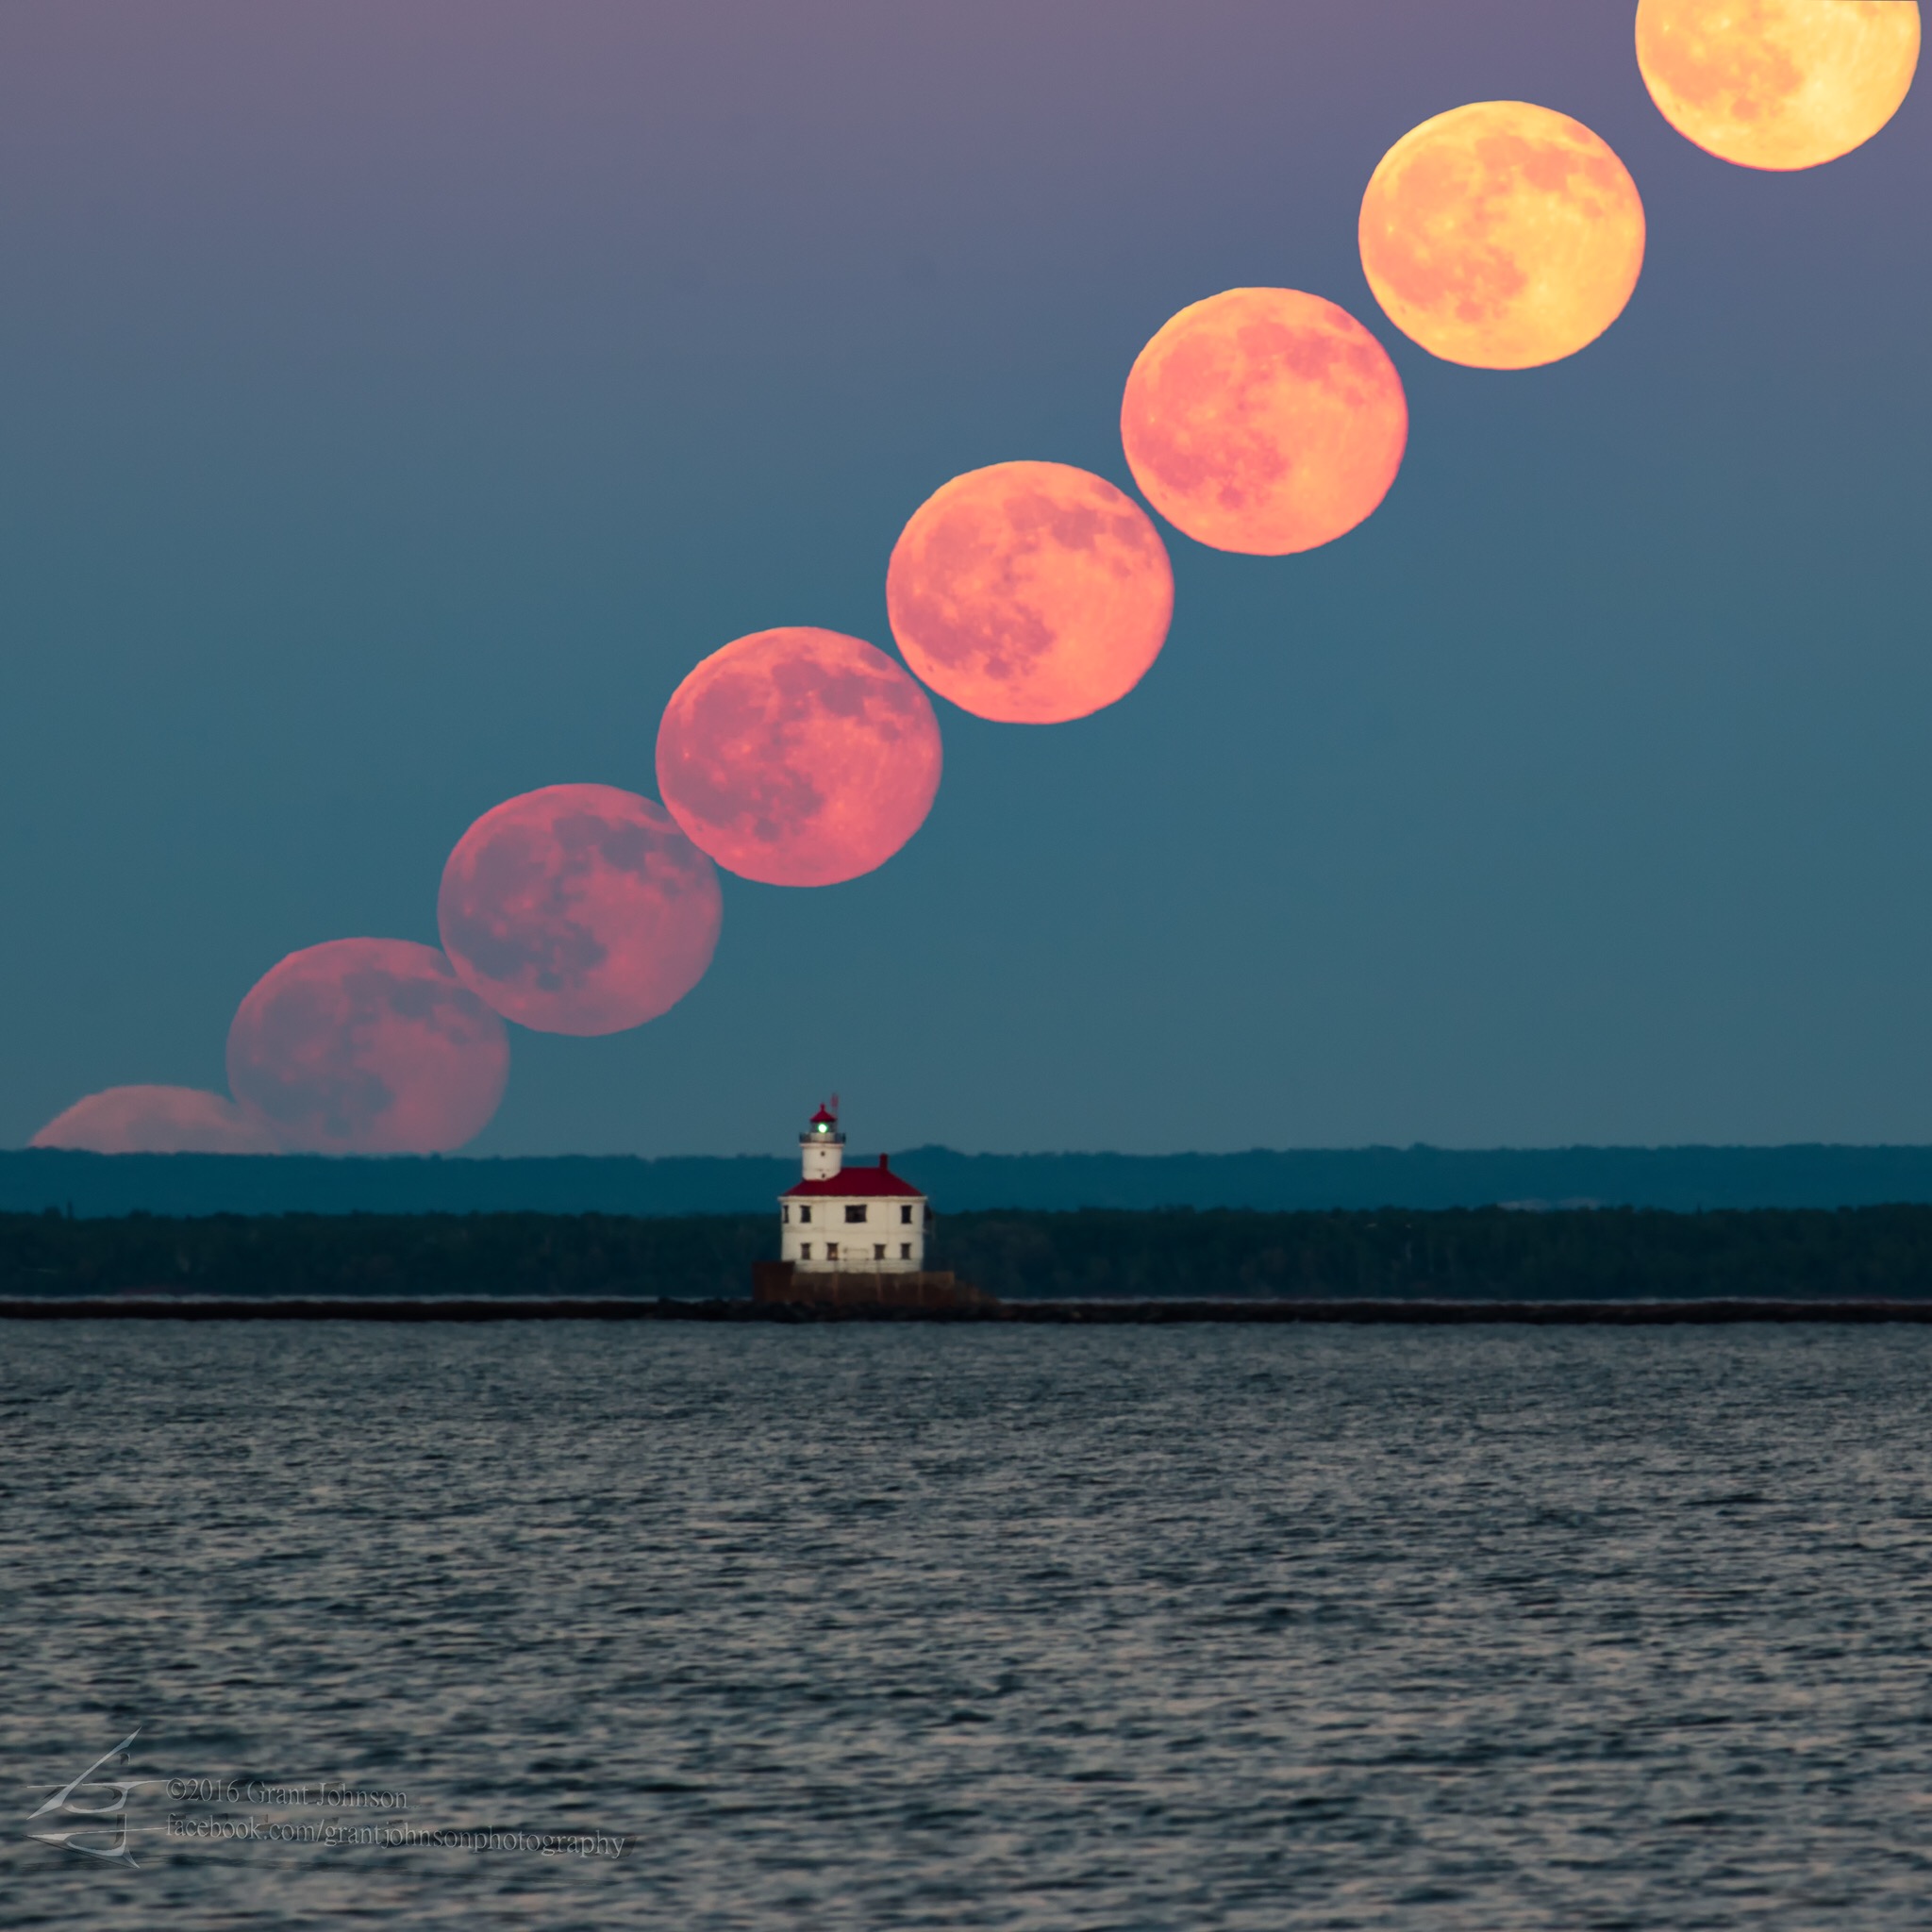 Delicious 'Strawberry Moon' Photo: Rare Solstice Full Moon Wows Stargazers